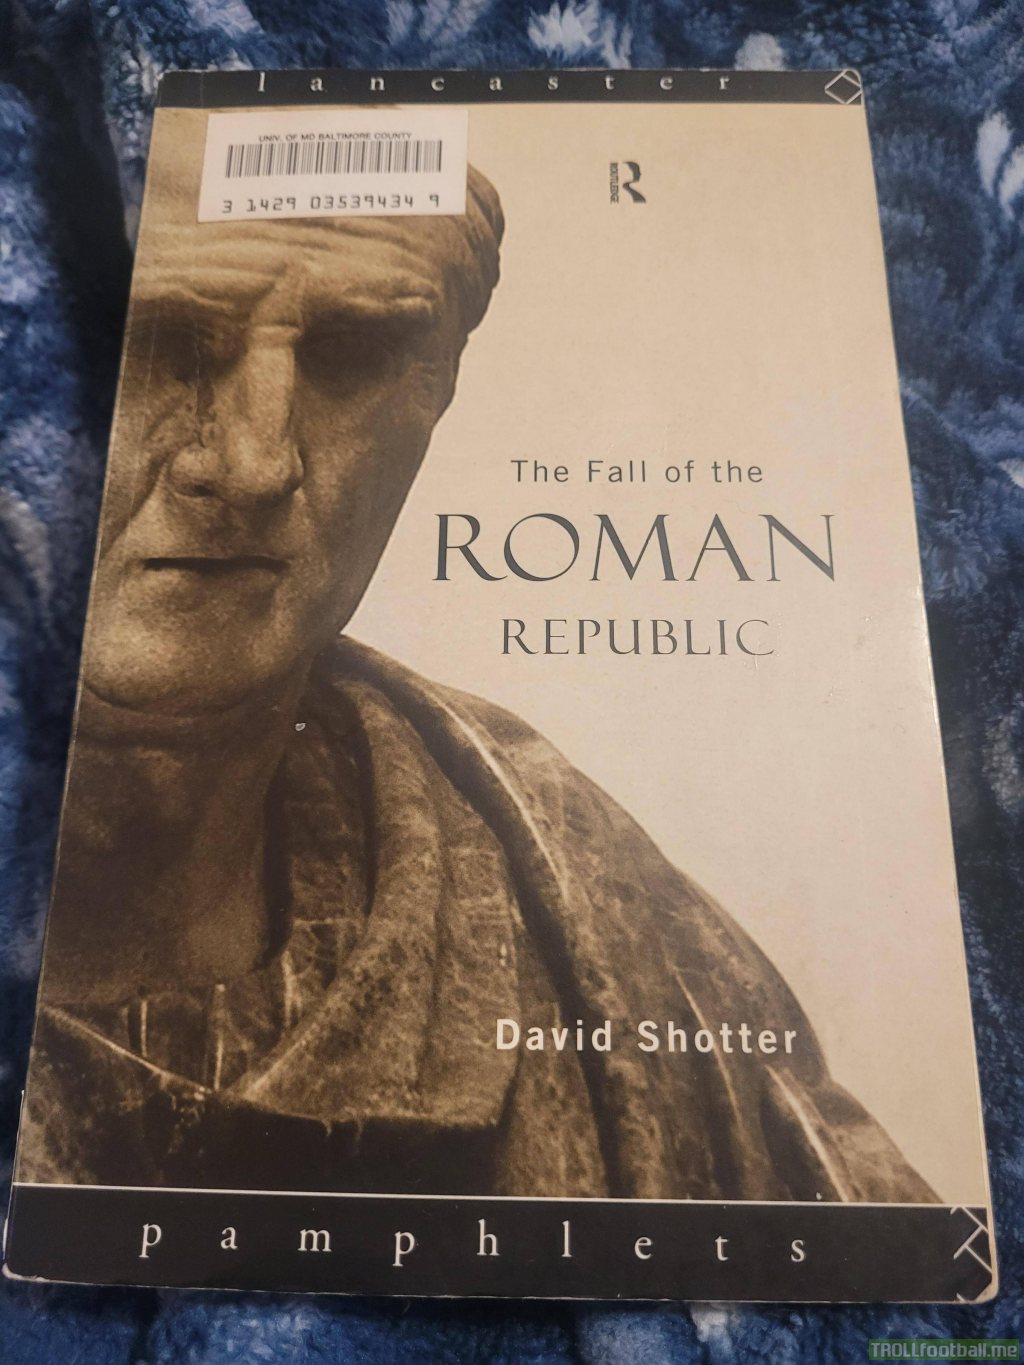 Is it just me or does Cicero look a lot like Steve Bruce?